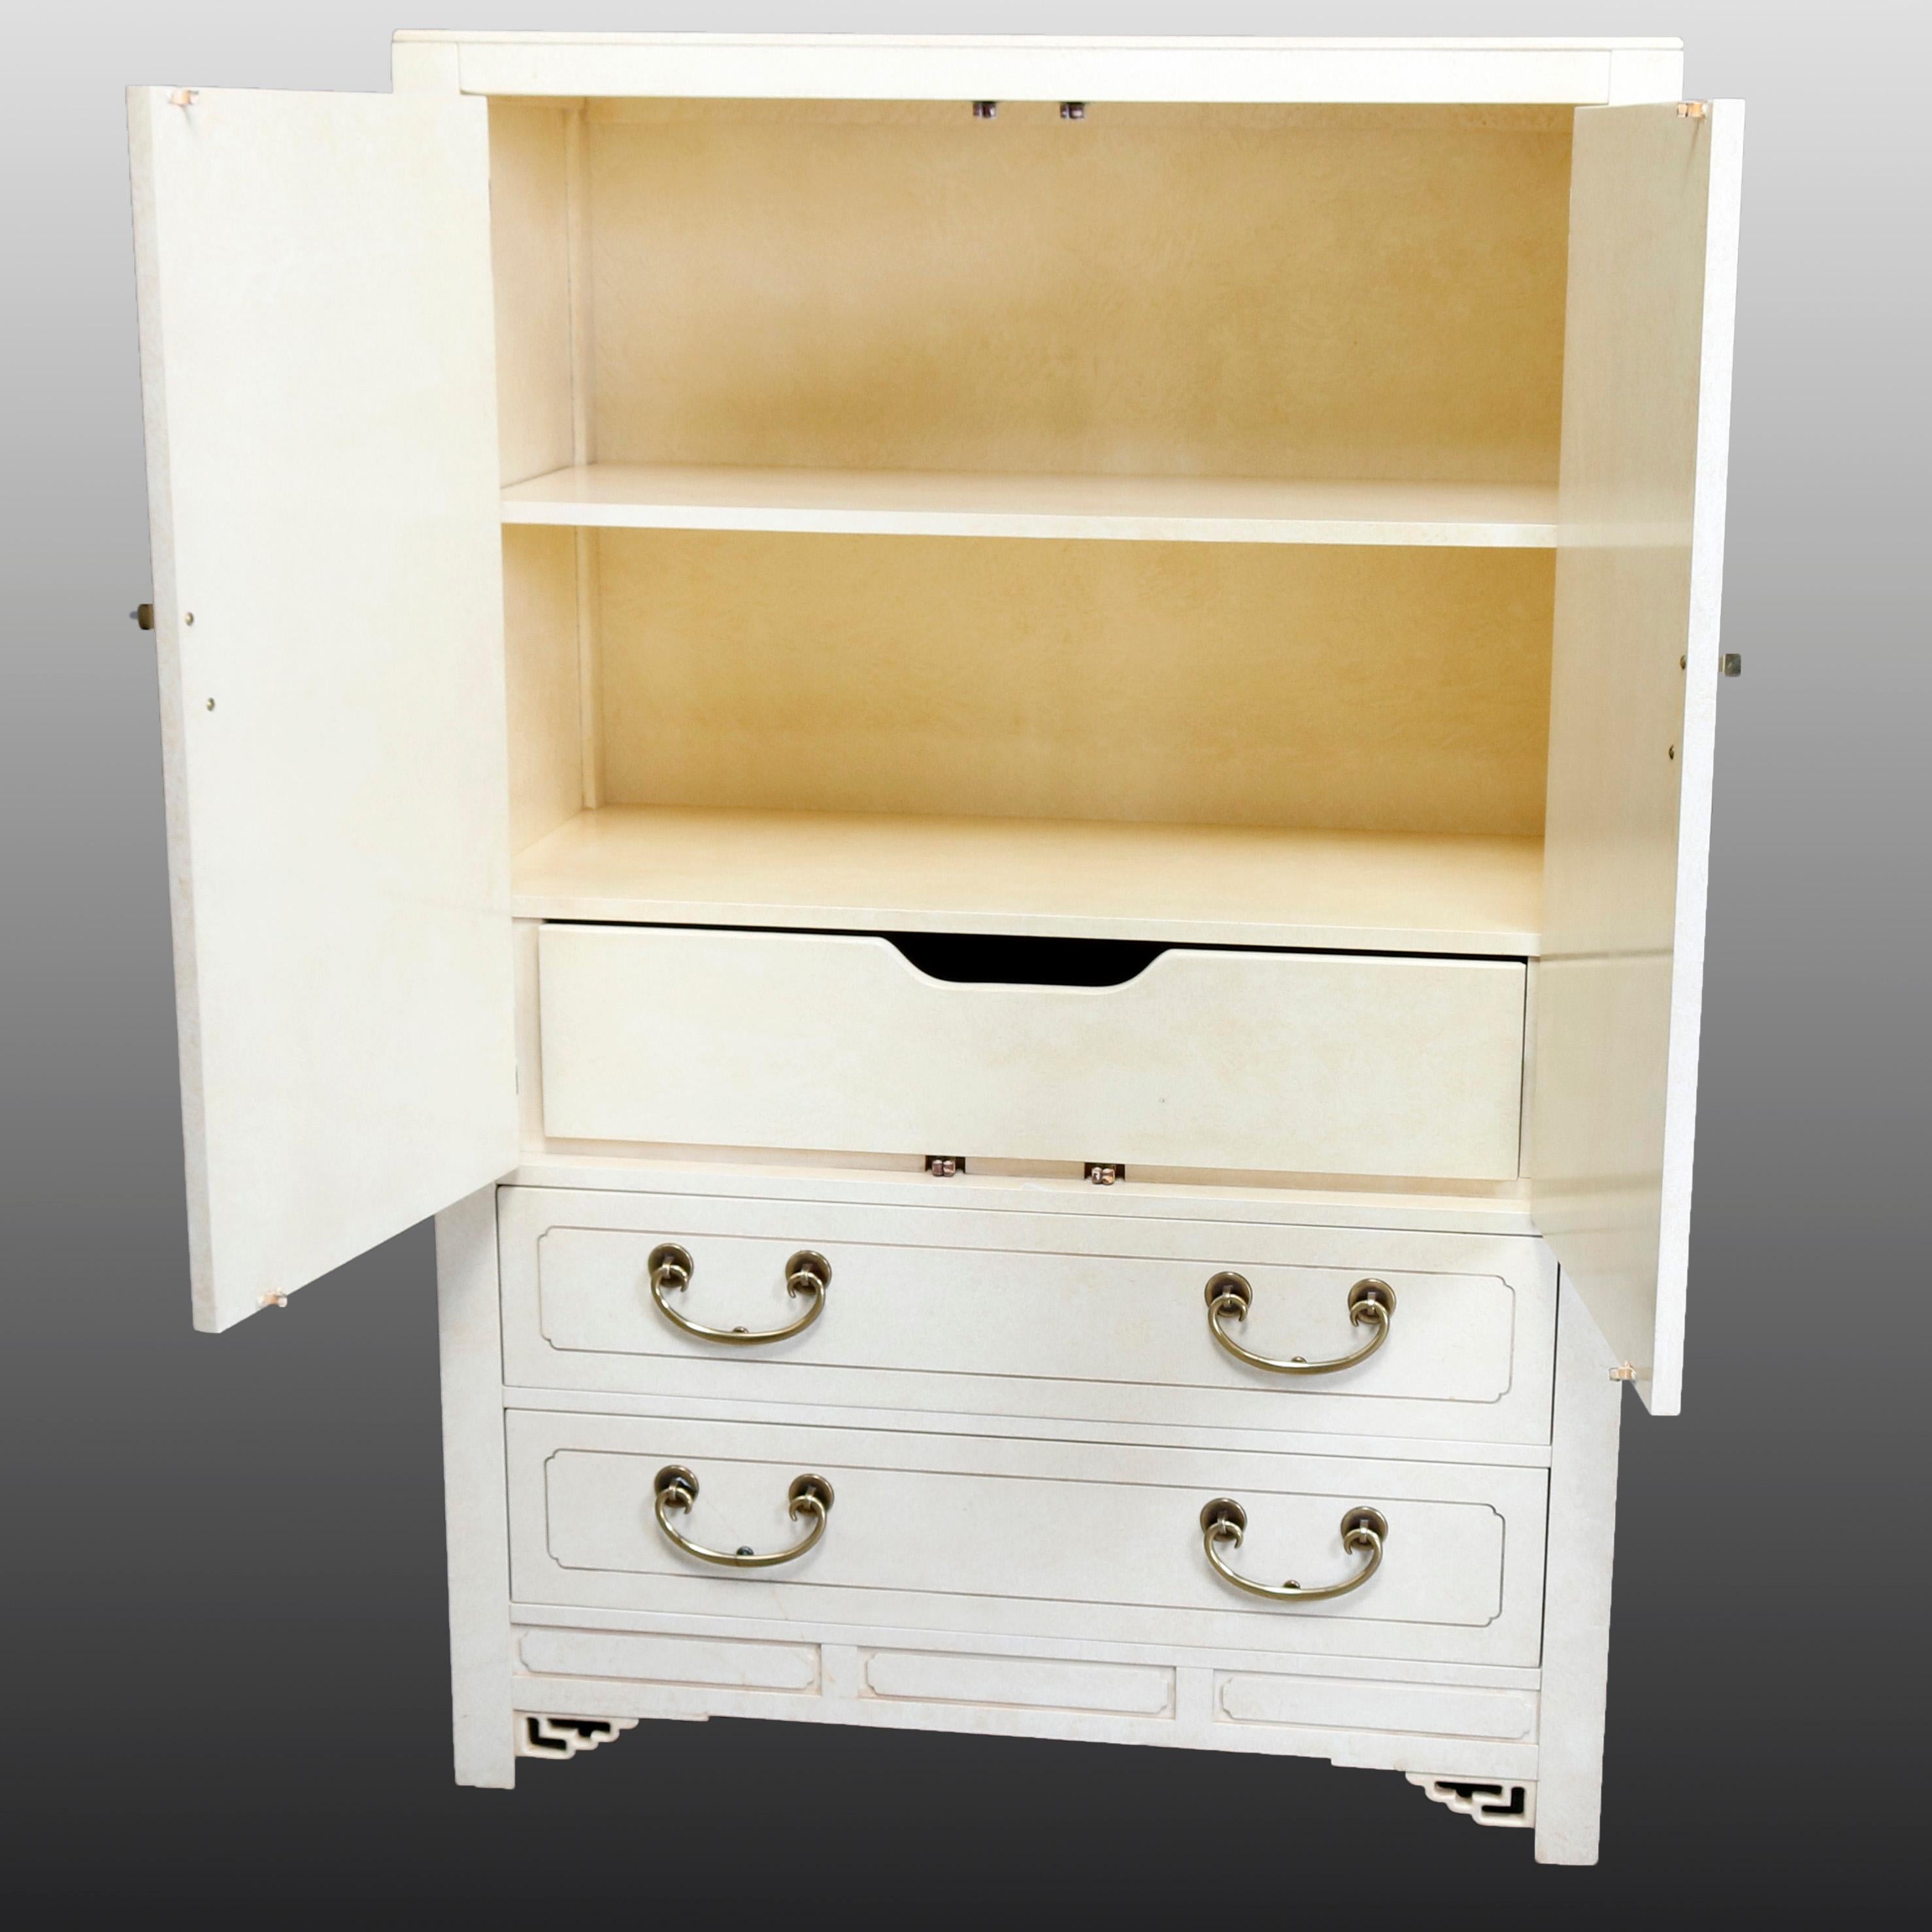 A Mid-Century Modern wardrobe or linen press by Hickory White offers Chinese Chippendale styling with all-over ivory enameled finish, pierced corbels having Asian influence, and cast brass hardware and accoutrements. Case with upper double doors